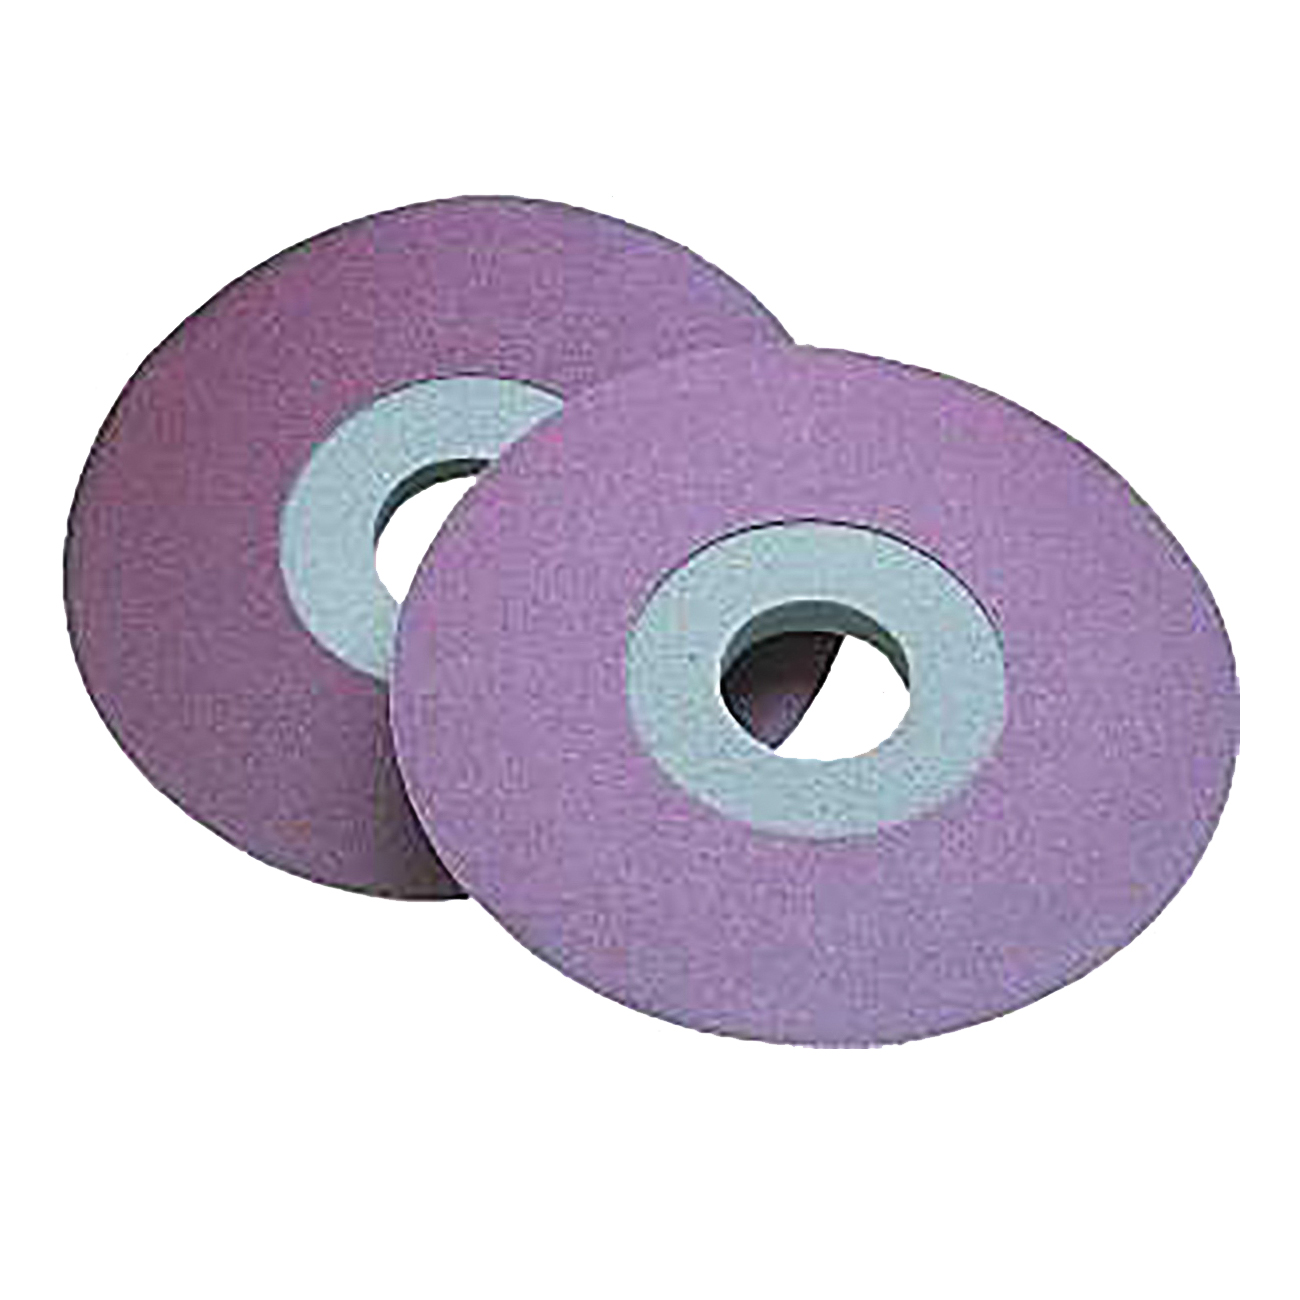 77085 Drywall Sanding Pad with Abrasive Disc, 9 in Dia, 5/8 in Arbor, 80 Grit, Coarse, Foam Backing